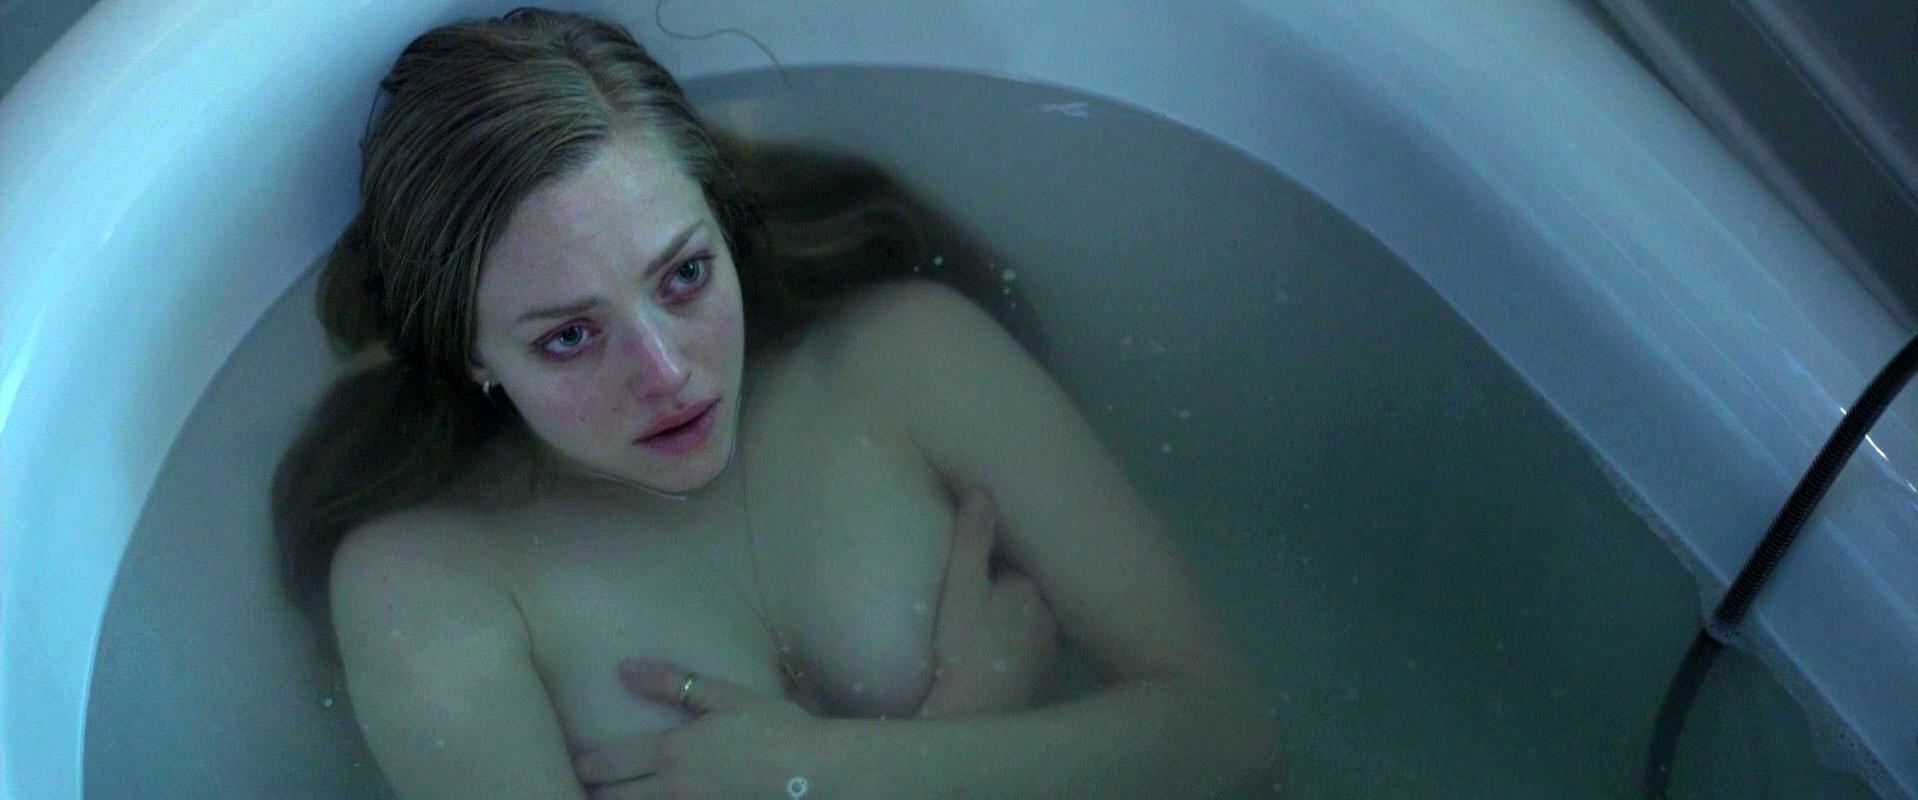 Nude Video Celebs Amanda Seyfried Sexy Fathers And Daughters 2015